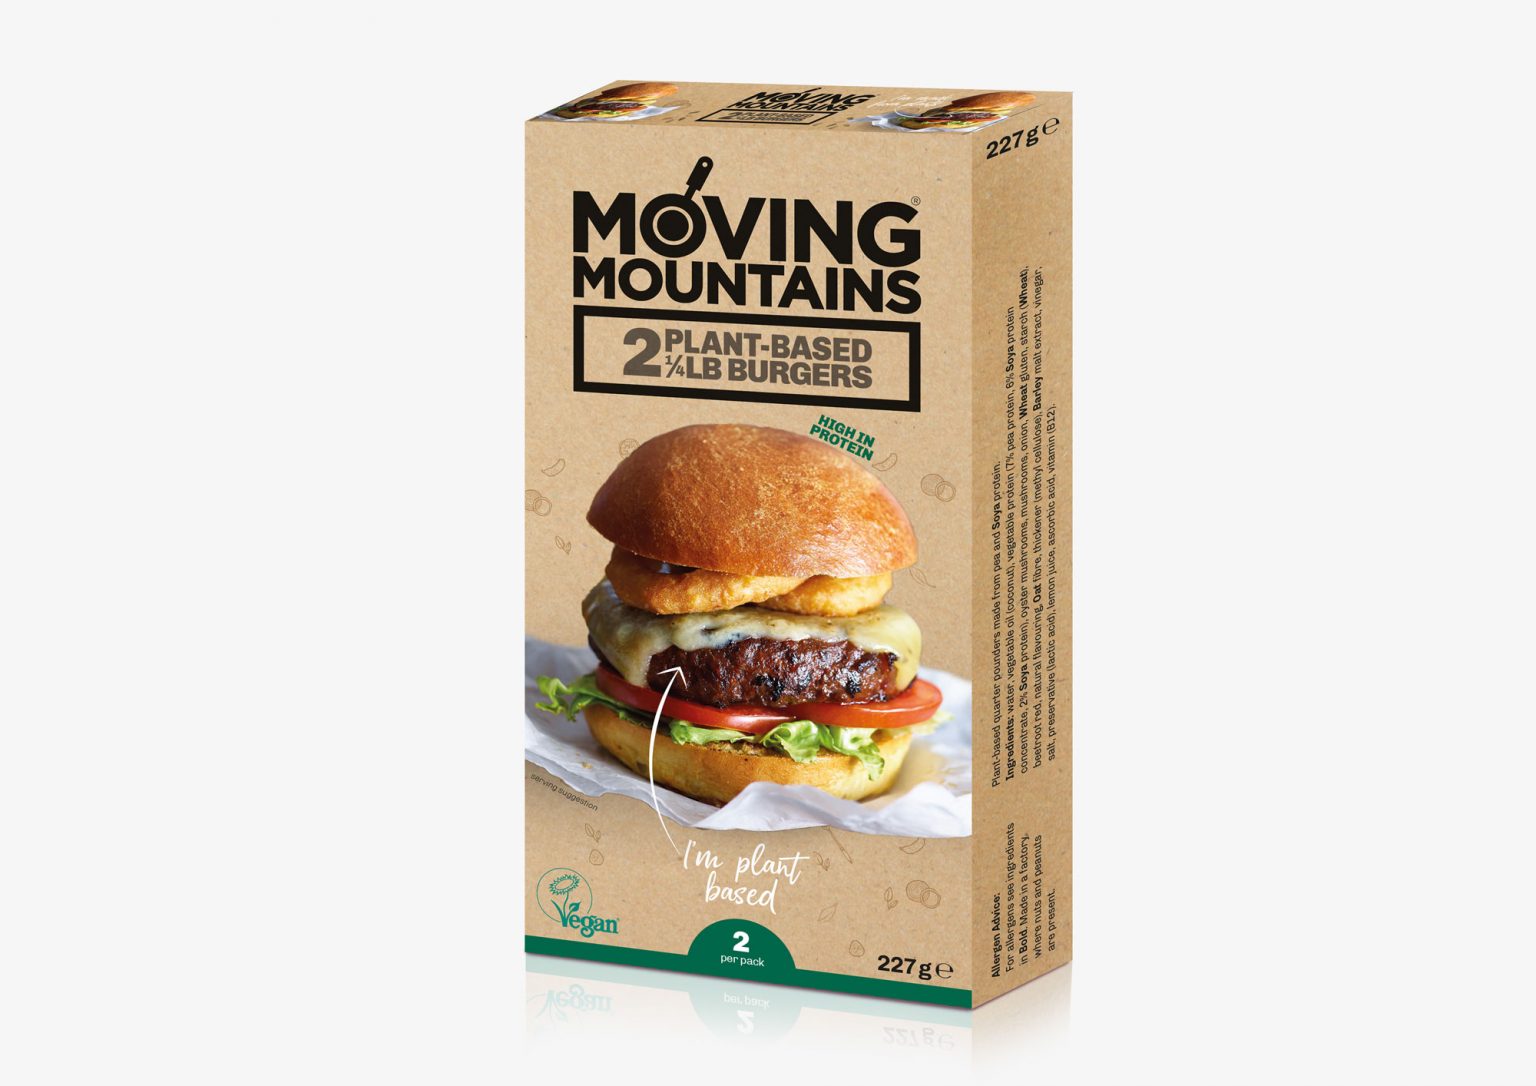 Moving Mountains Launching Into 300 Waitrose Stores Nationwide